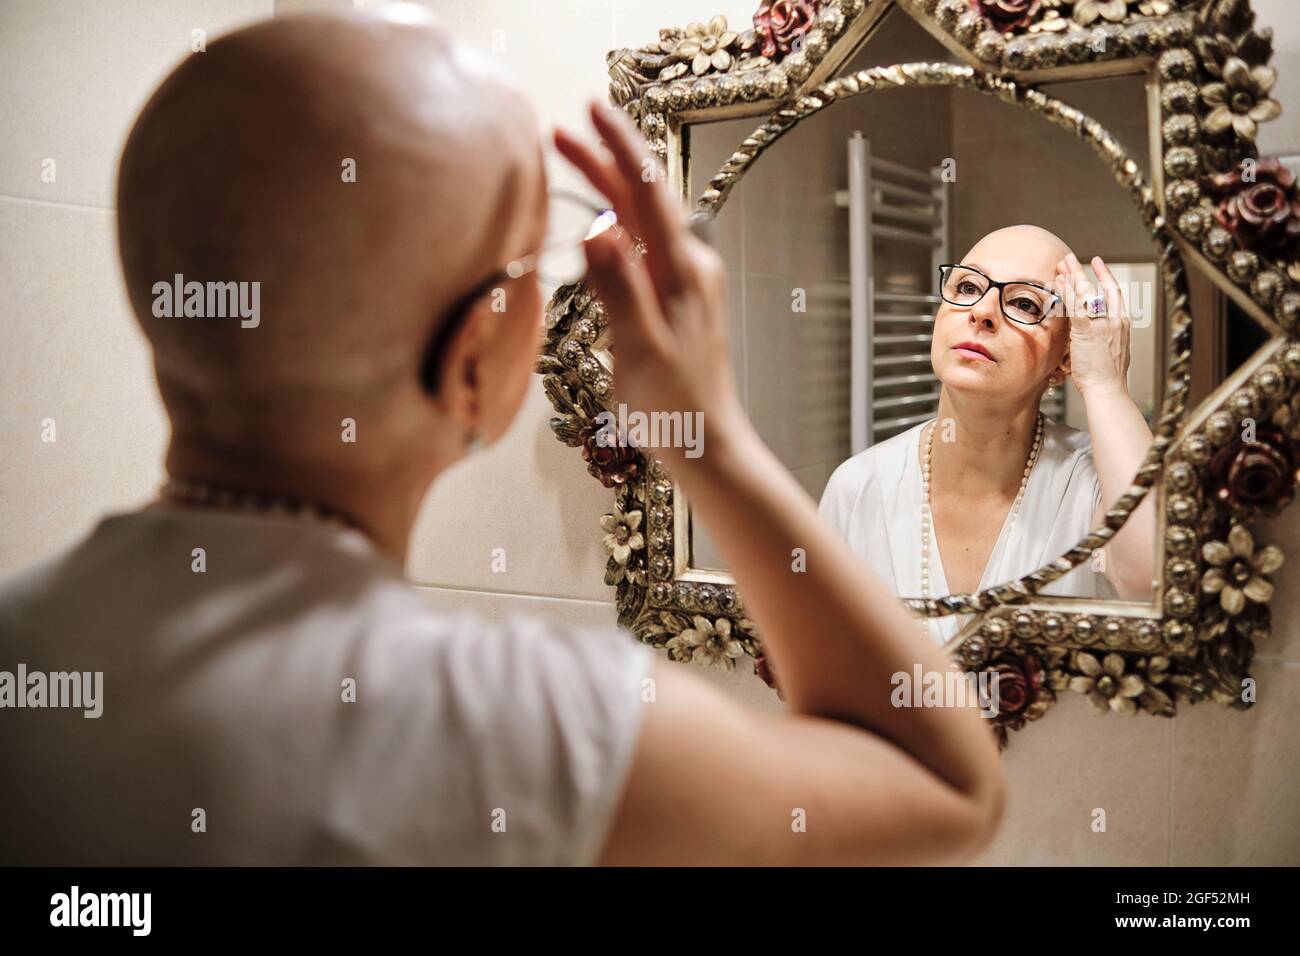 Woman with cancer touching bald head while looking at reflection in mirror Stock Photo